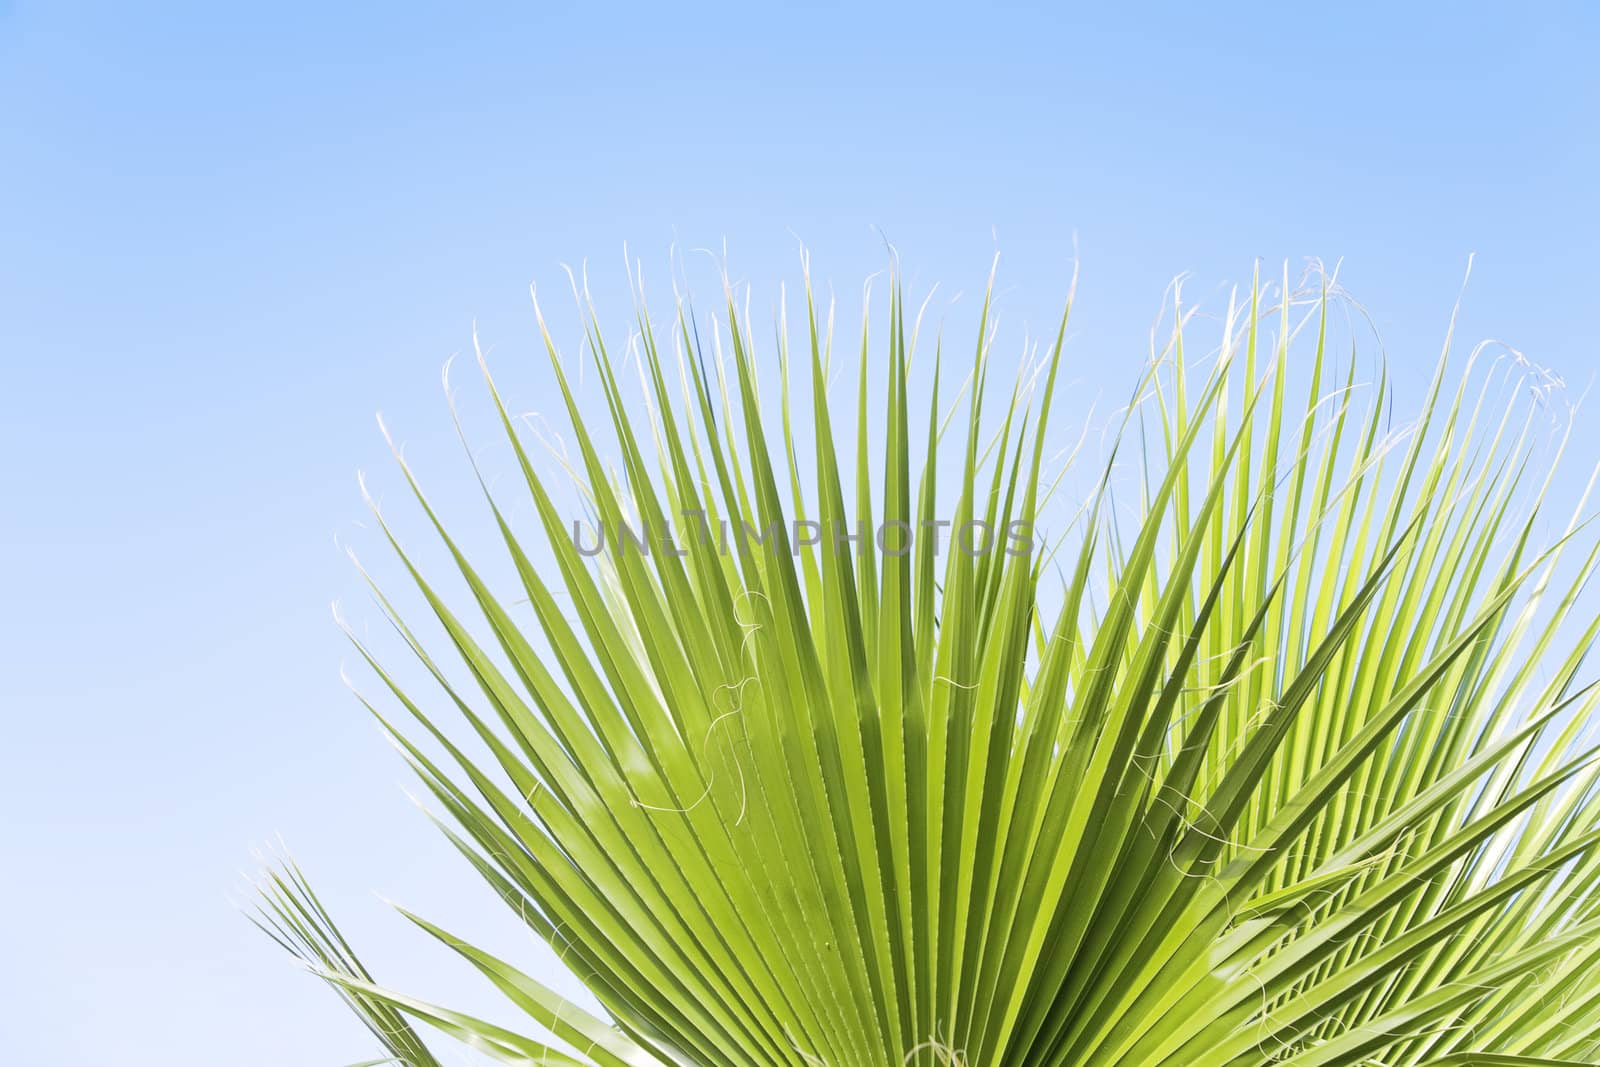 leaves of a palm tree against the clear blue sky